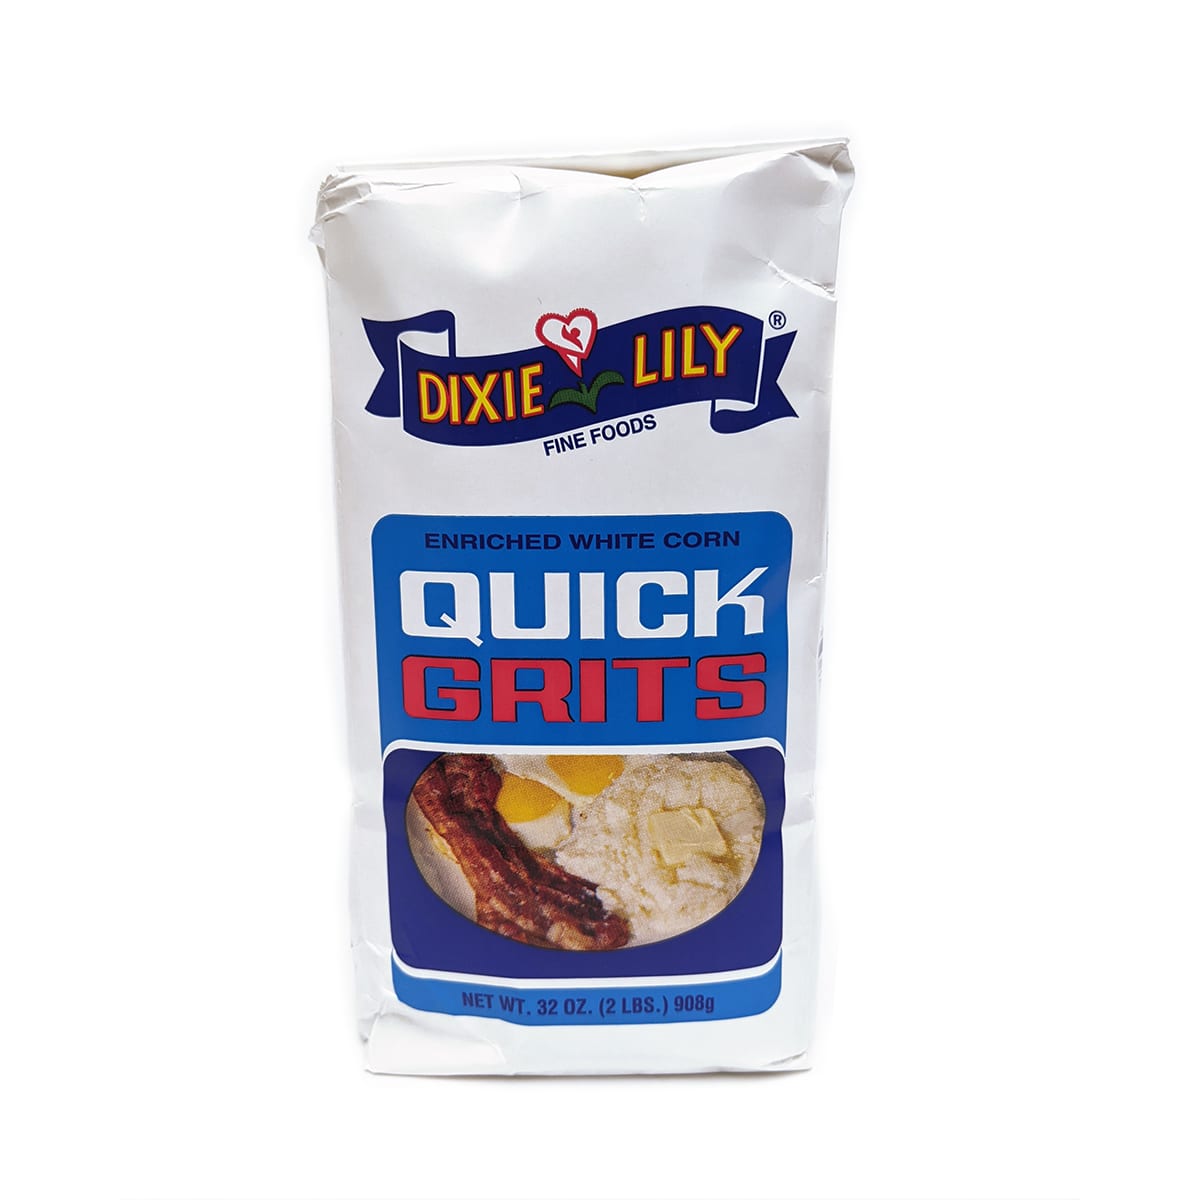 Dixie Lily Quick Grits Enriched White Corn 32oz Front Angle